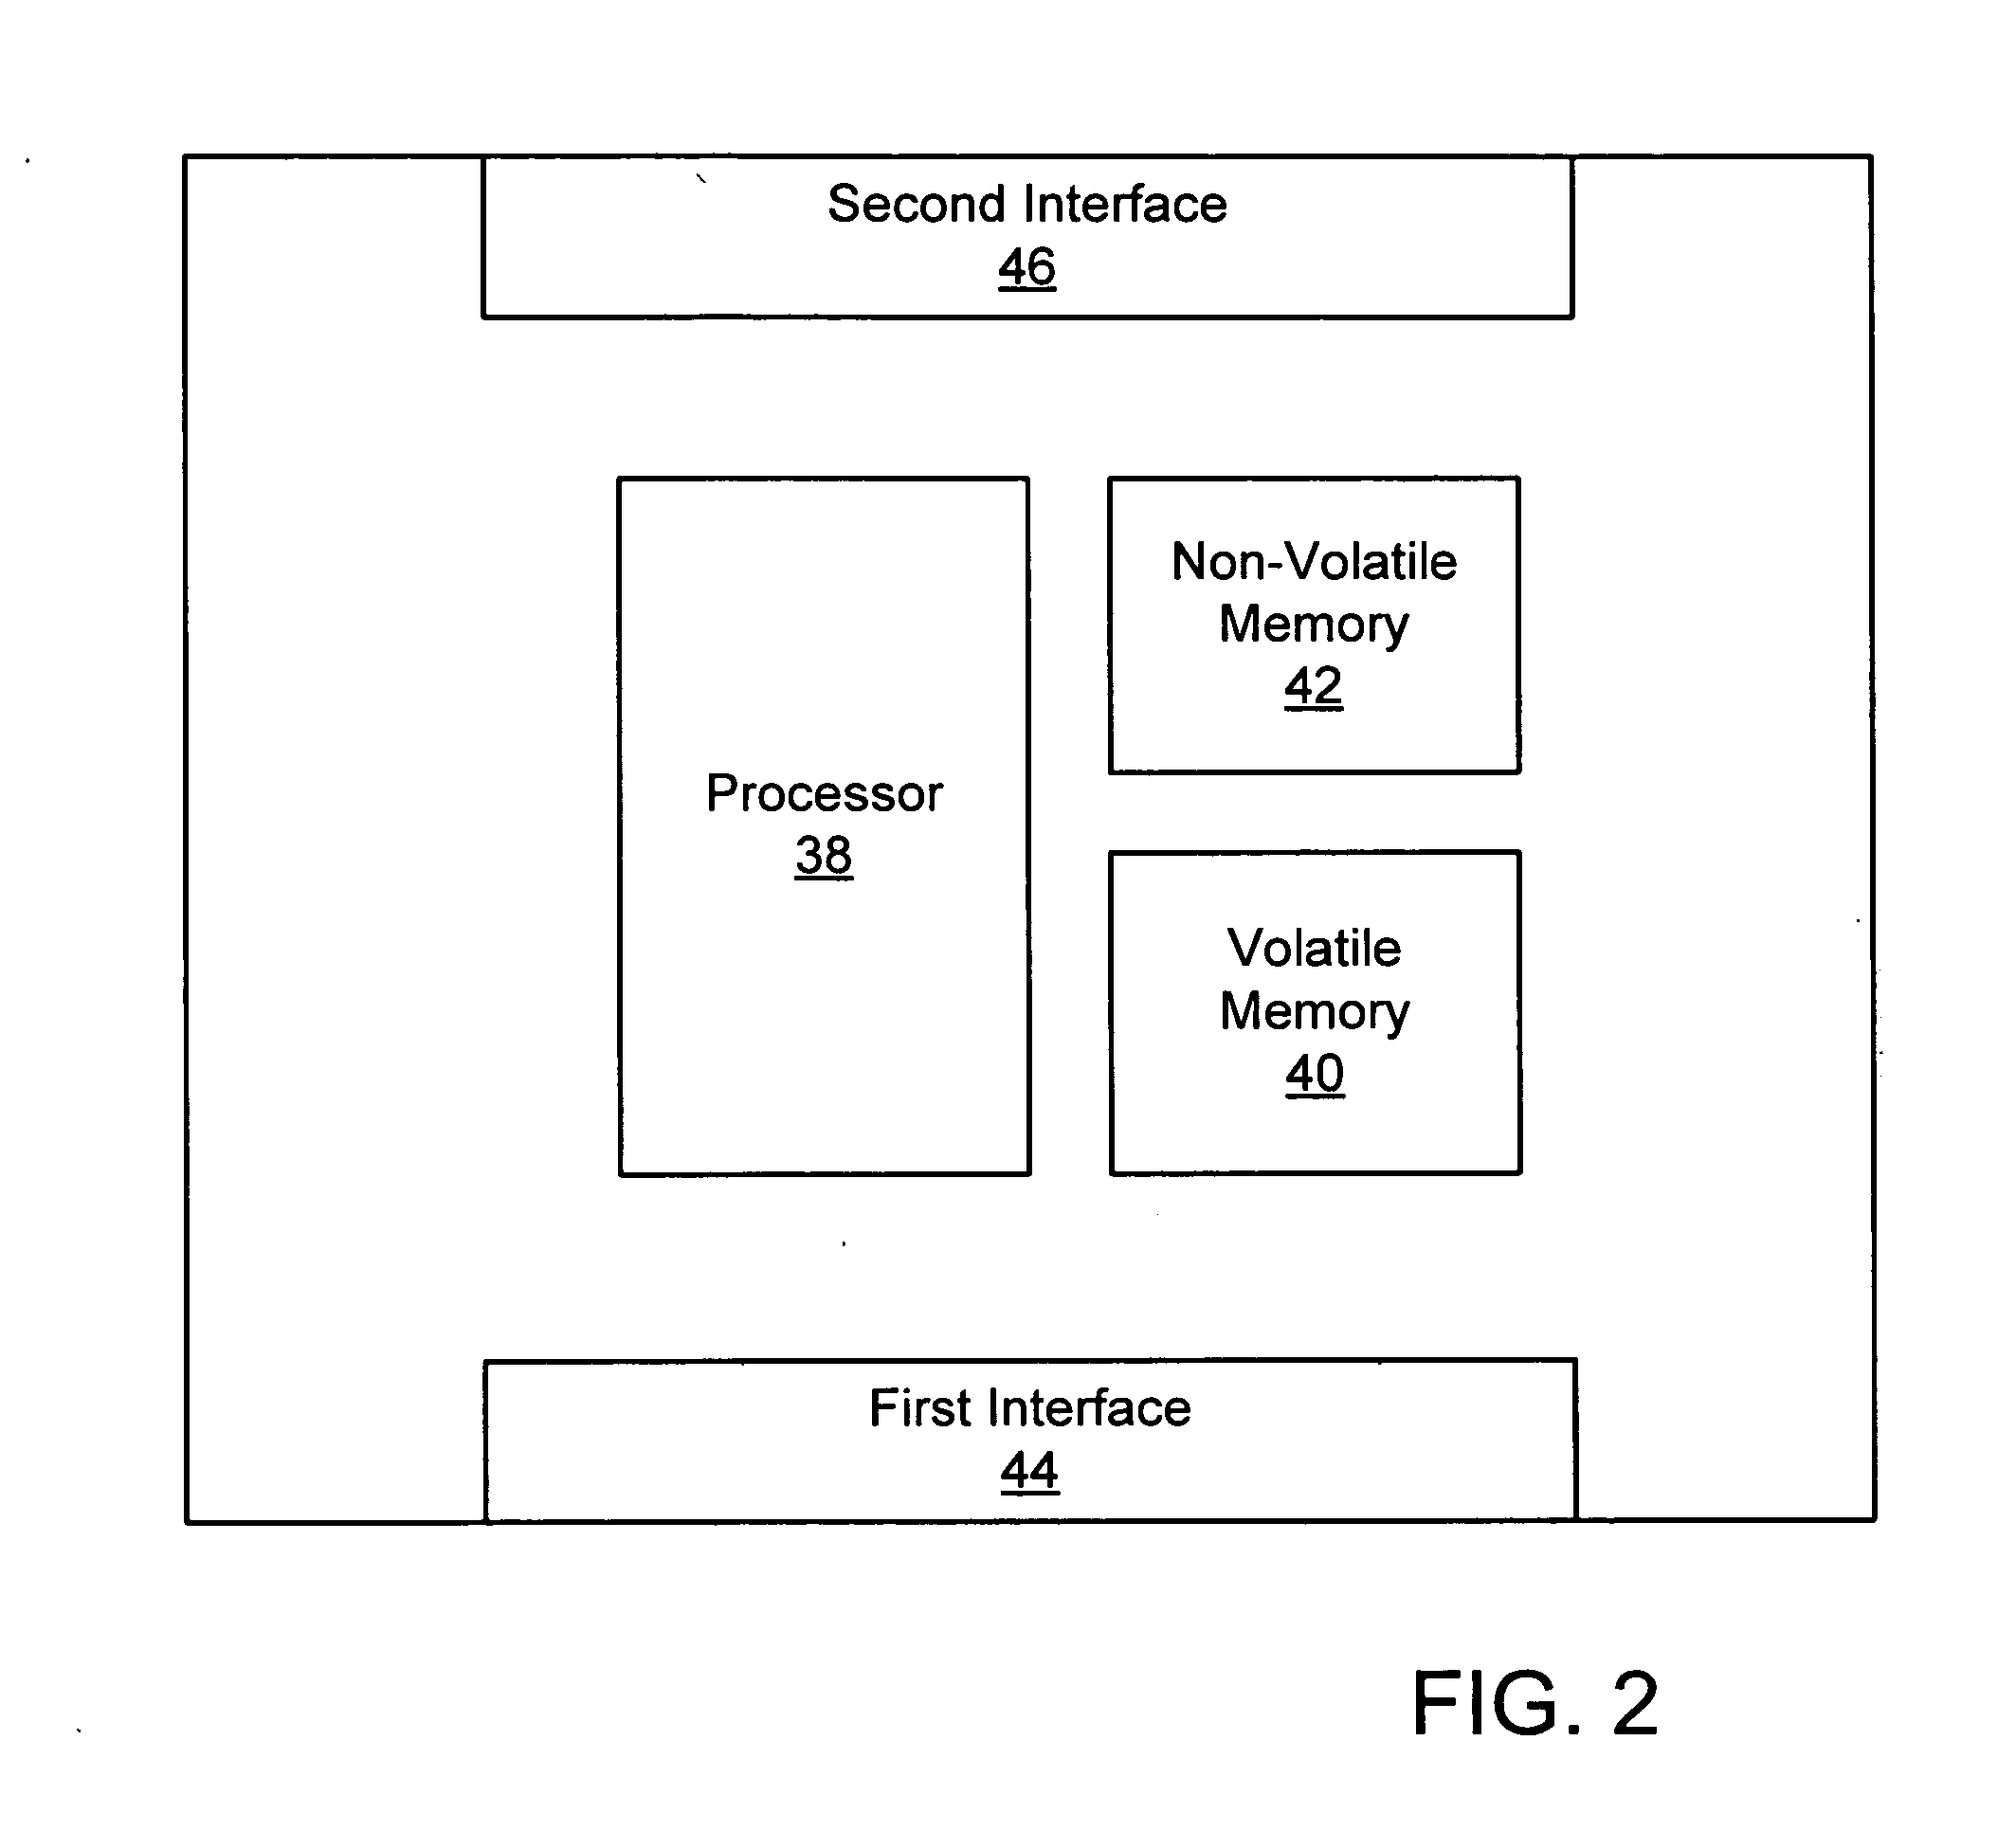 System and method for provisioning a wireless device to only be able to access network services within a specific location